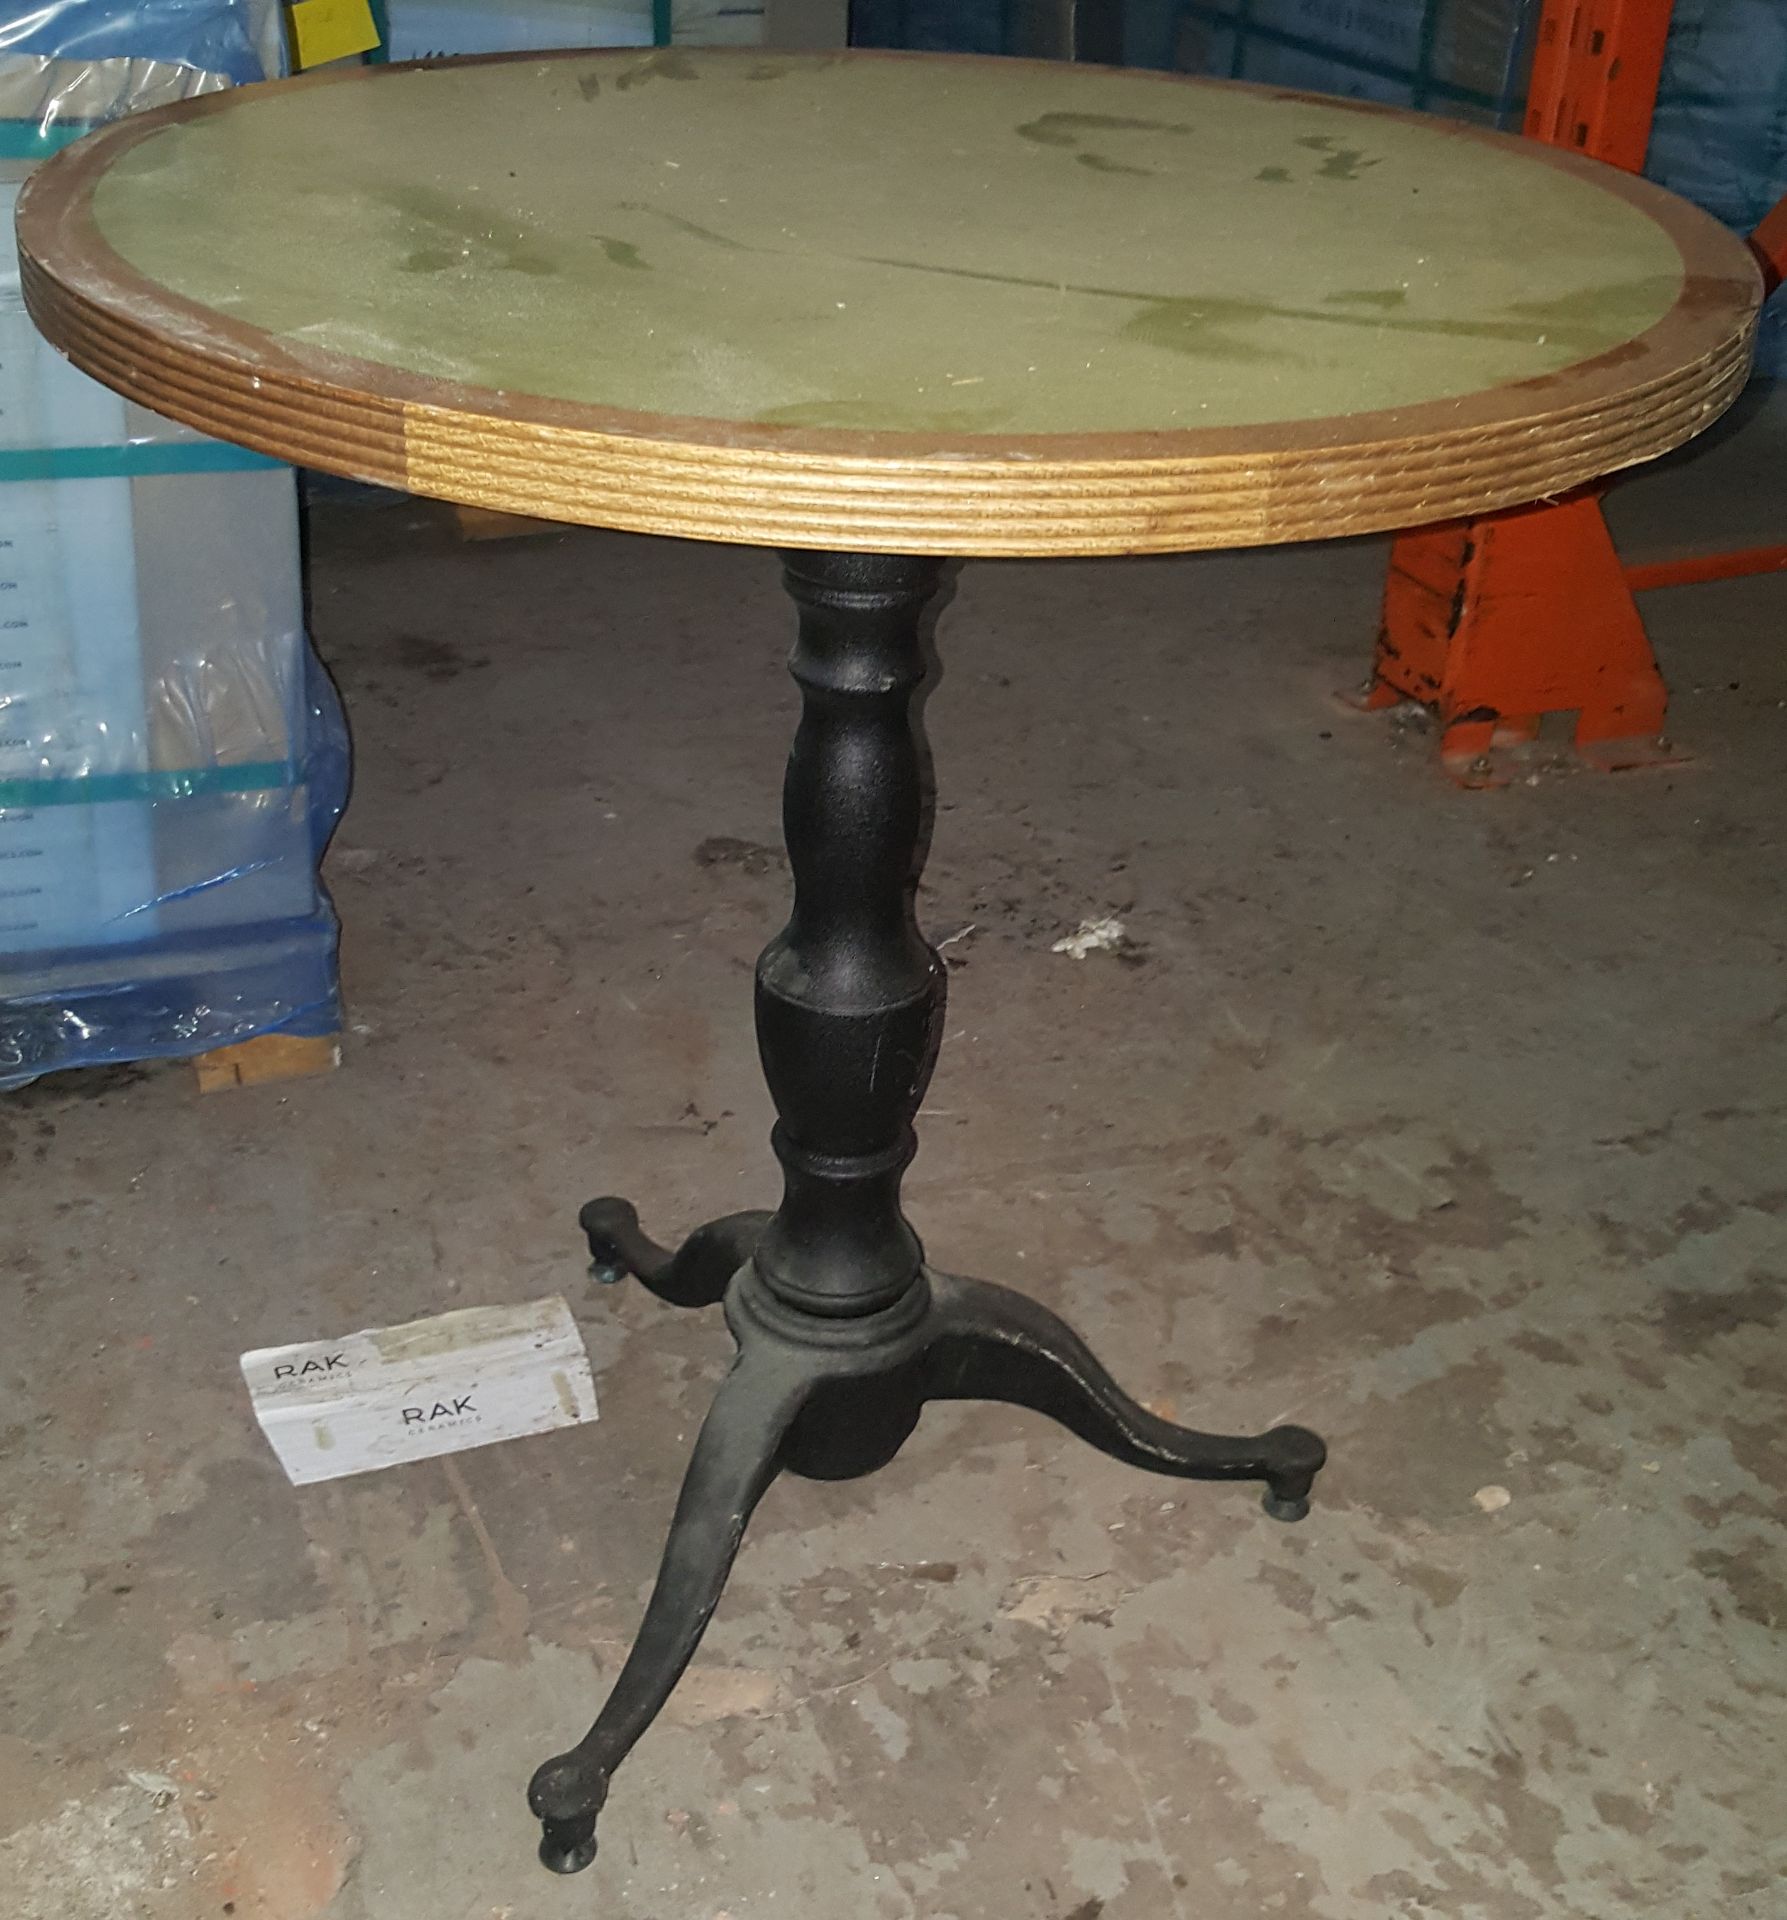 3 x Assorted Restaurant Tables With Green Top Finish & Three-Legged Base - REF:CO001 - CL011 - Image 5 of 9